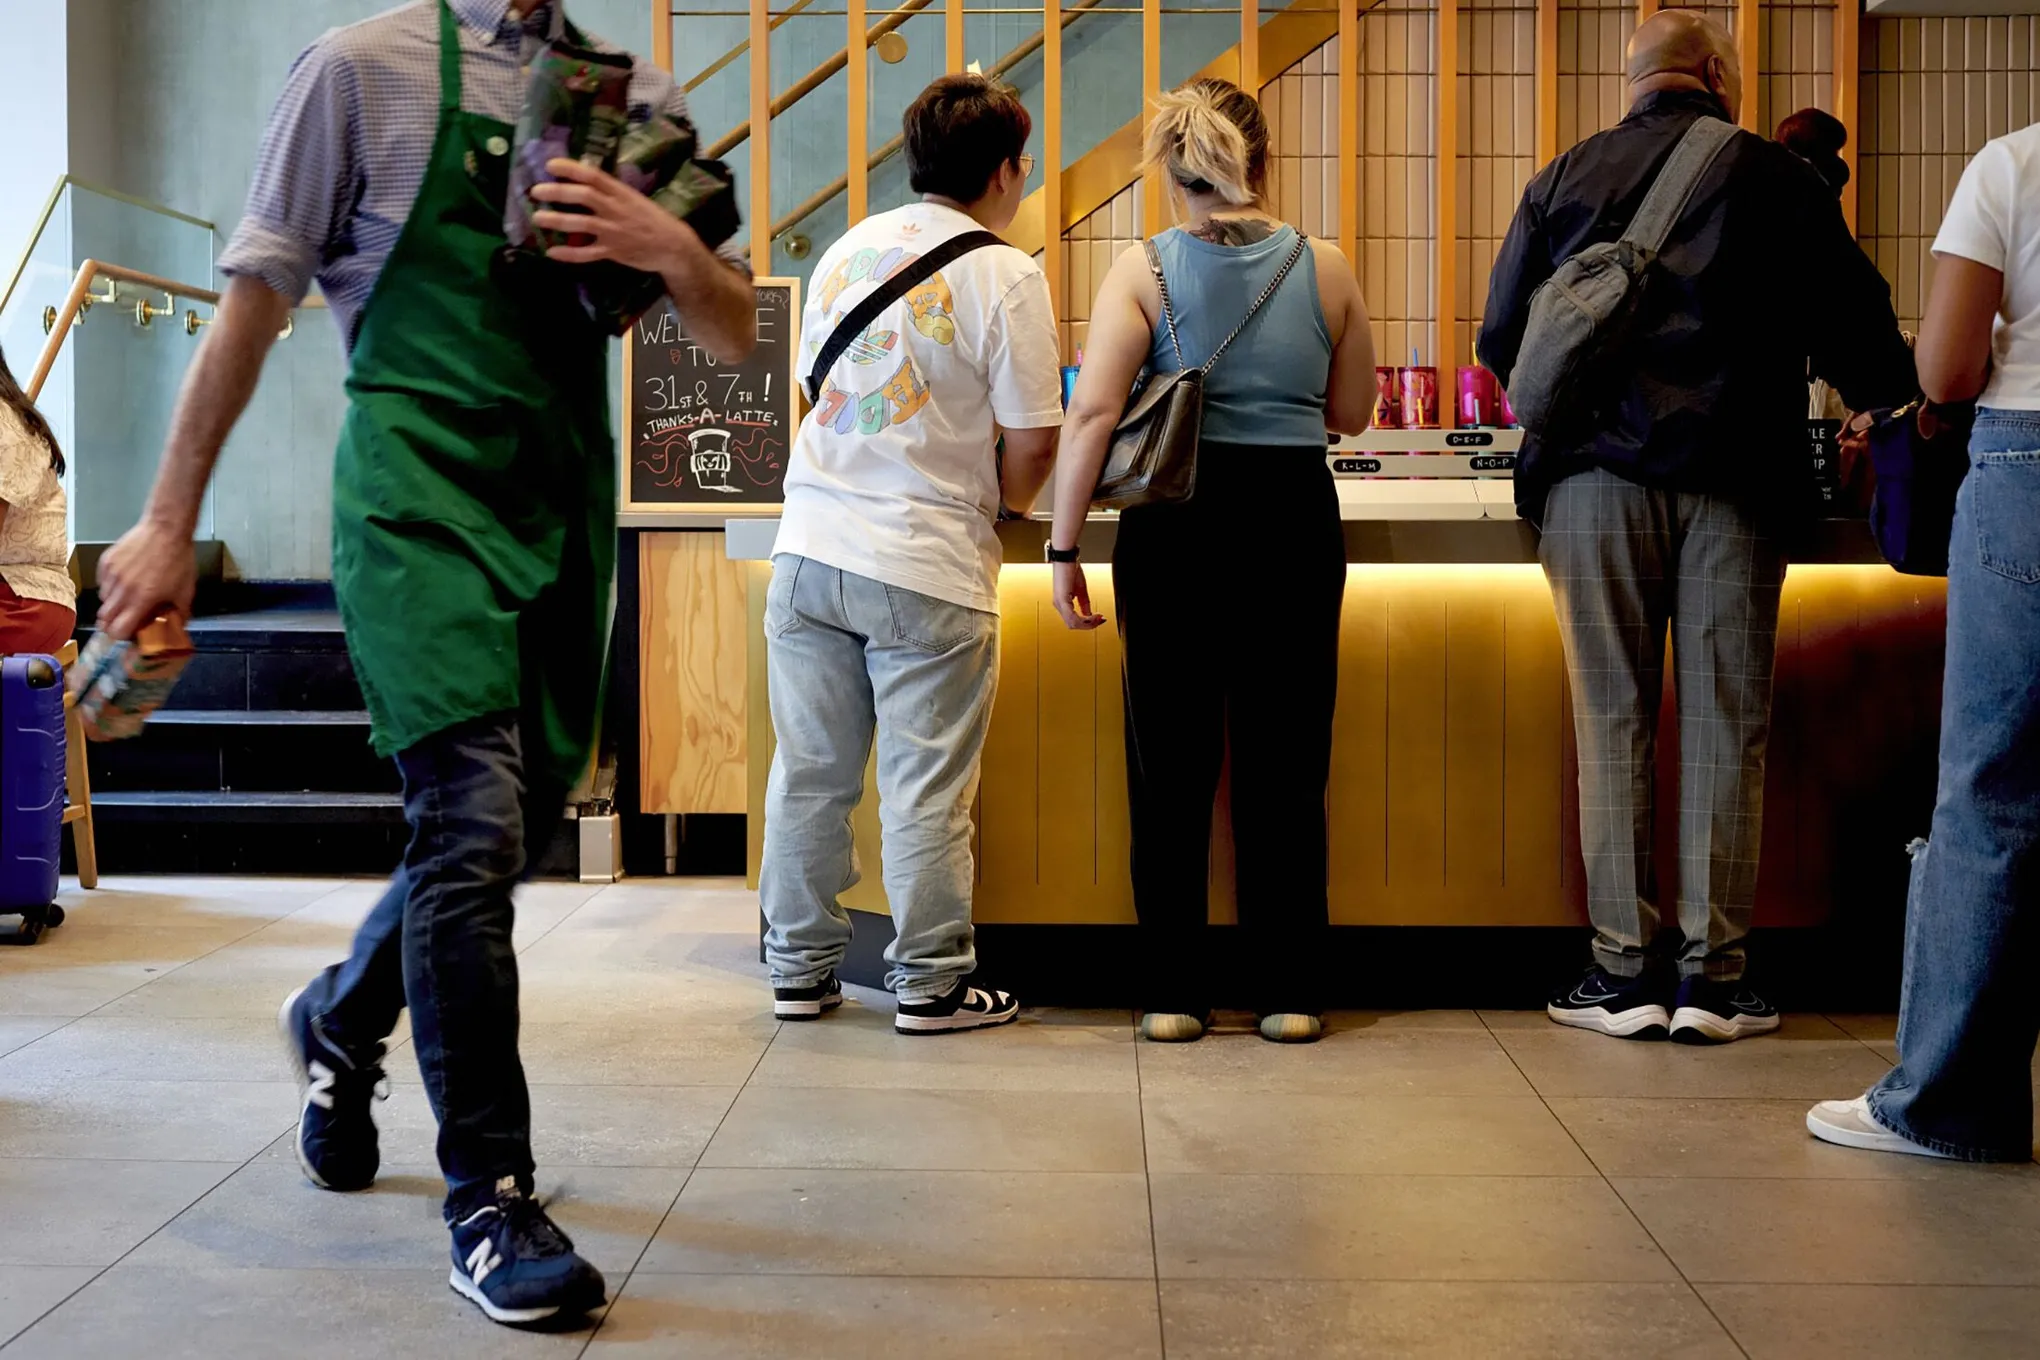 Starbucks Faces Customer Outrage Over Extended Wait Times Amid Staffing Woes